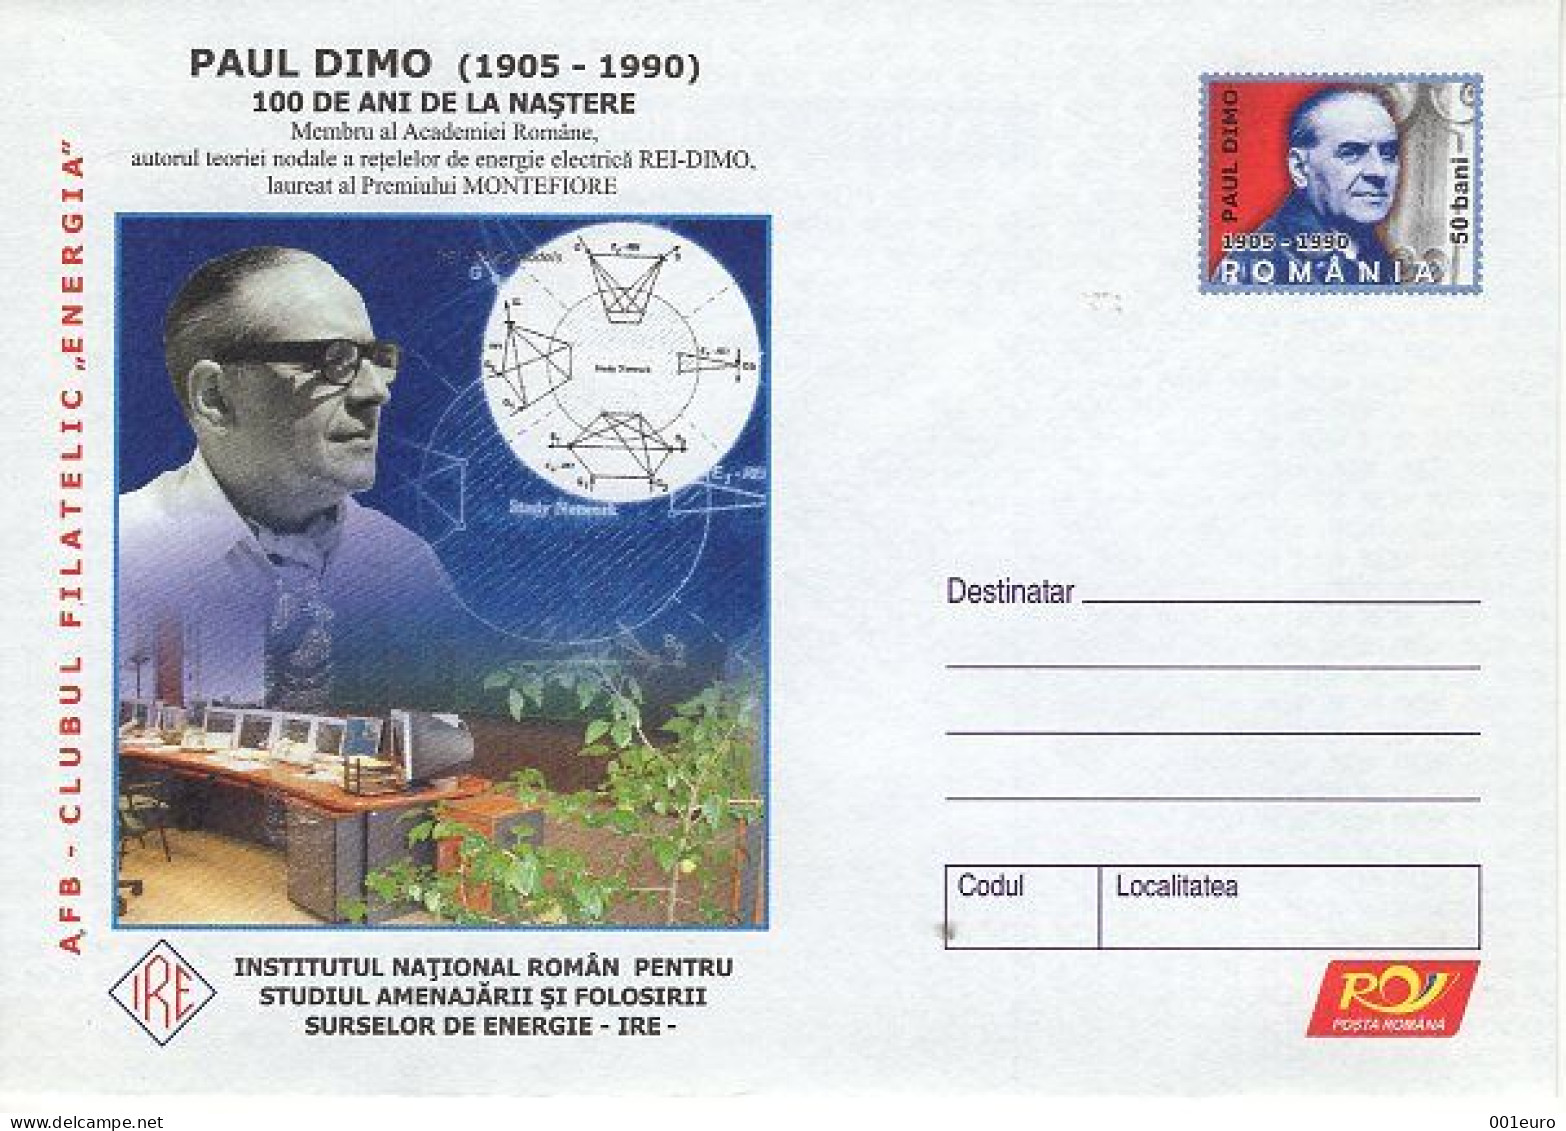 ROMANIA 066y2005: Paul Dimo, Energy & Computers, Unused Prepaid Postal Stationery Cover - Registered Shipping! - Ganzsachen